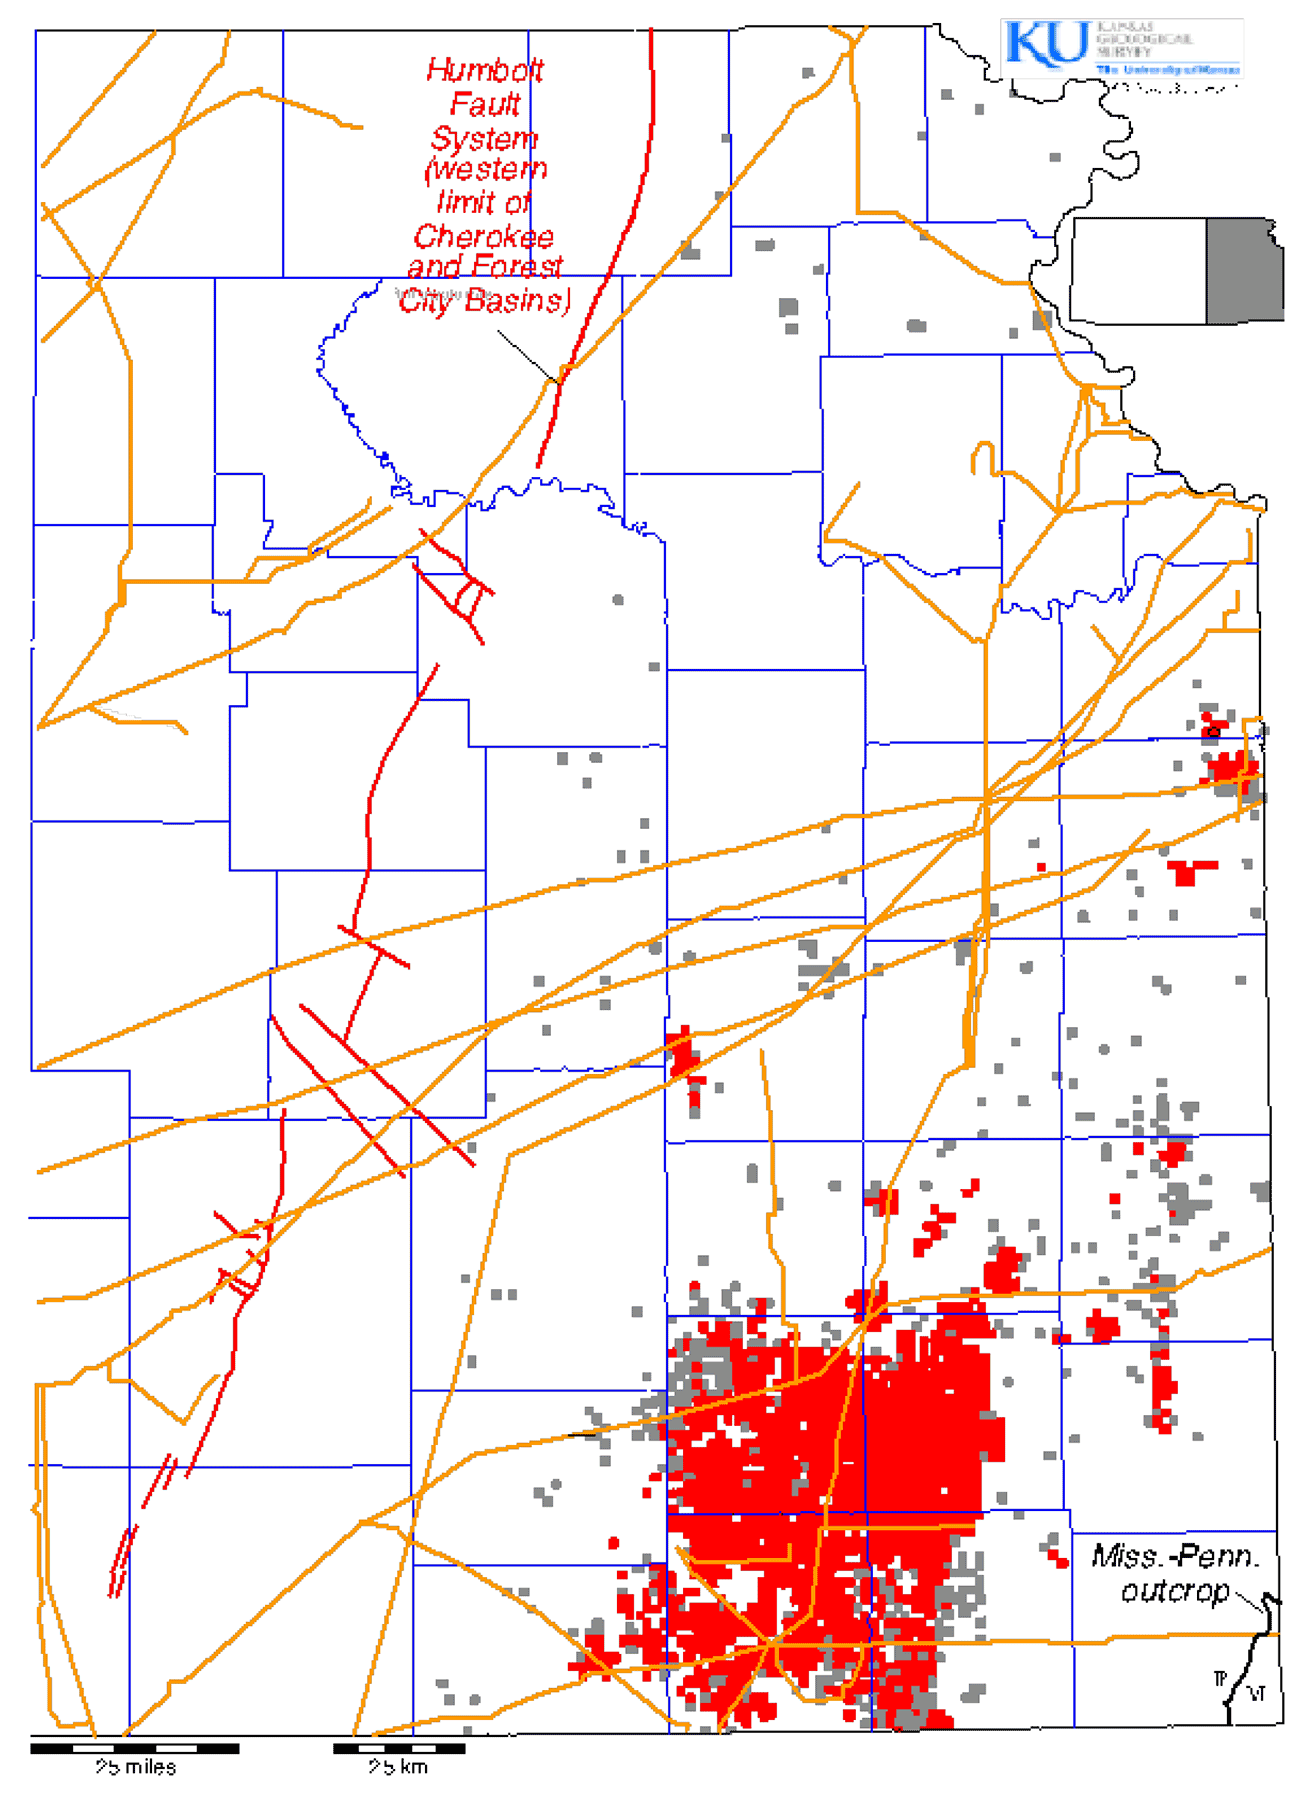 Locations of sections (nominally 1 square mile) in eastern Kansas with record of CBM production and sections with at least one well drilled for CBM but no production recorded.